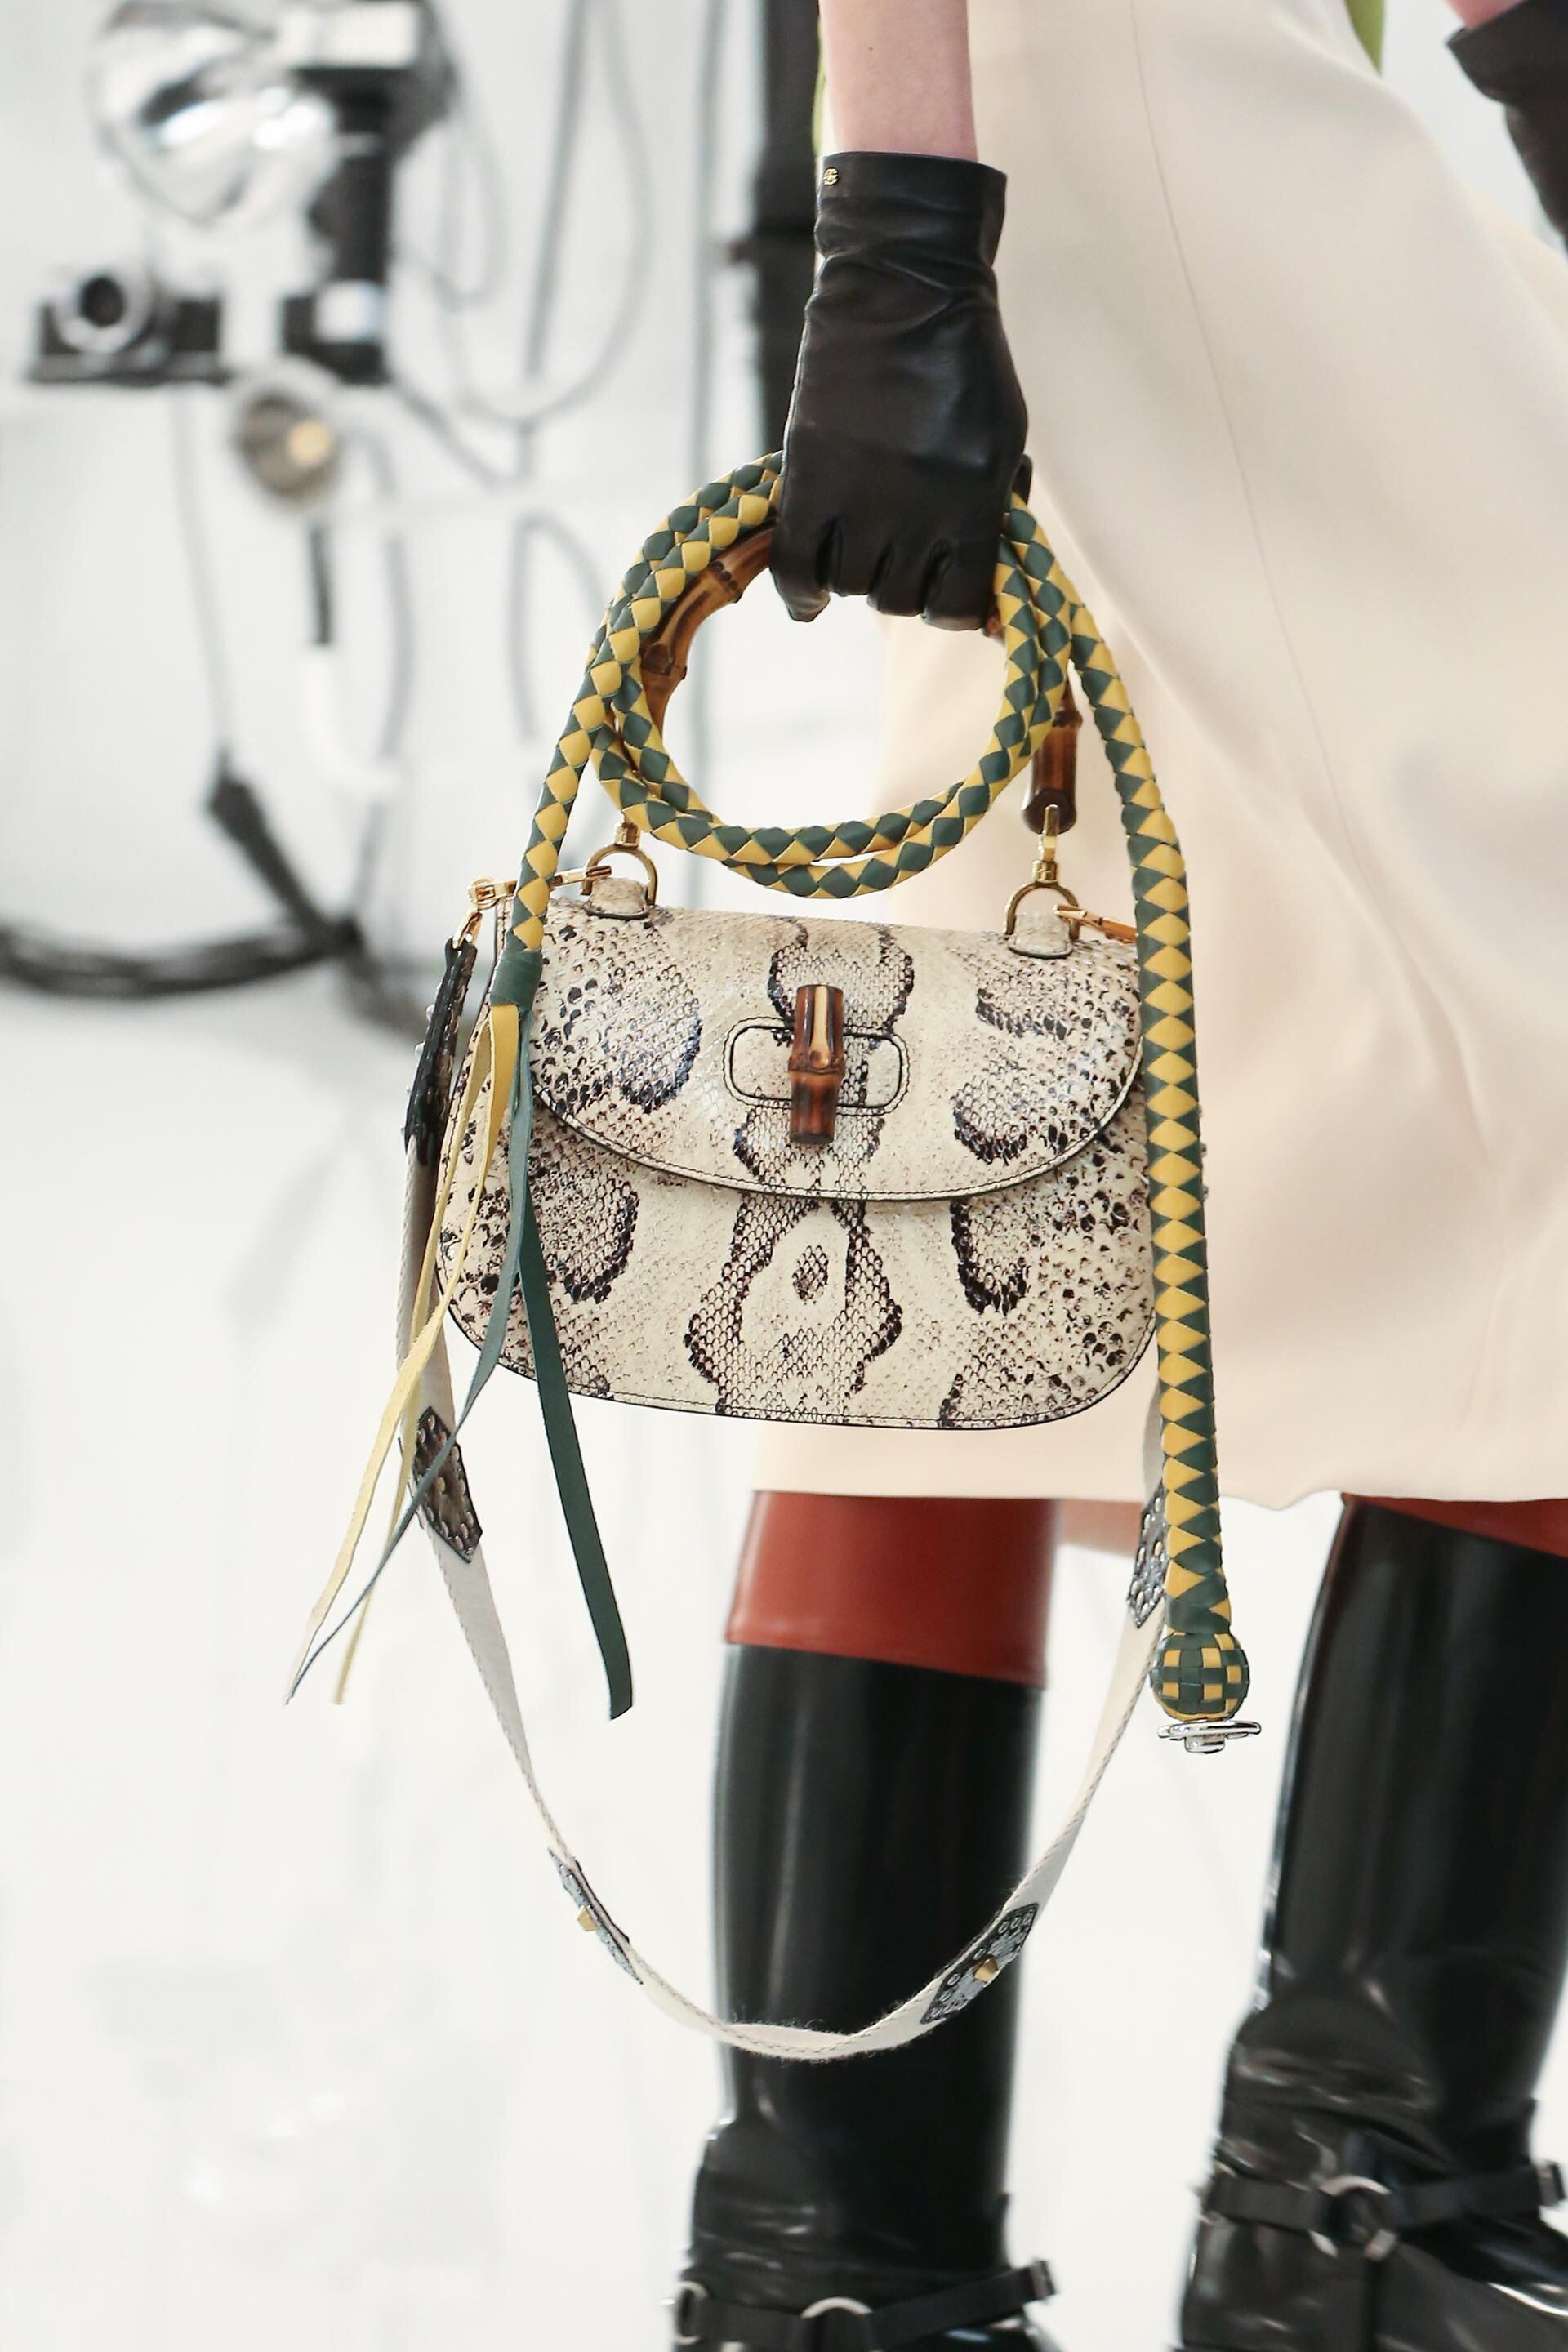 Awra Has An Impressive Designer Bag Collection Filled With Gucci